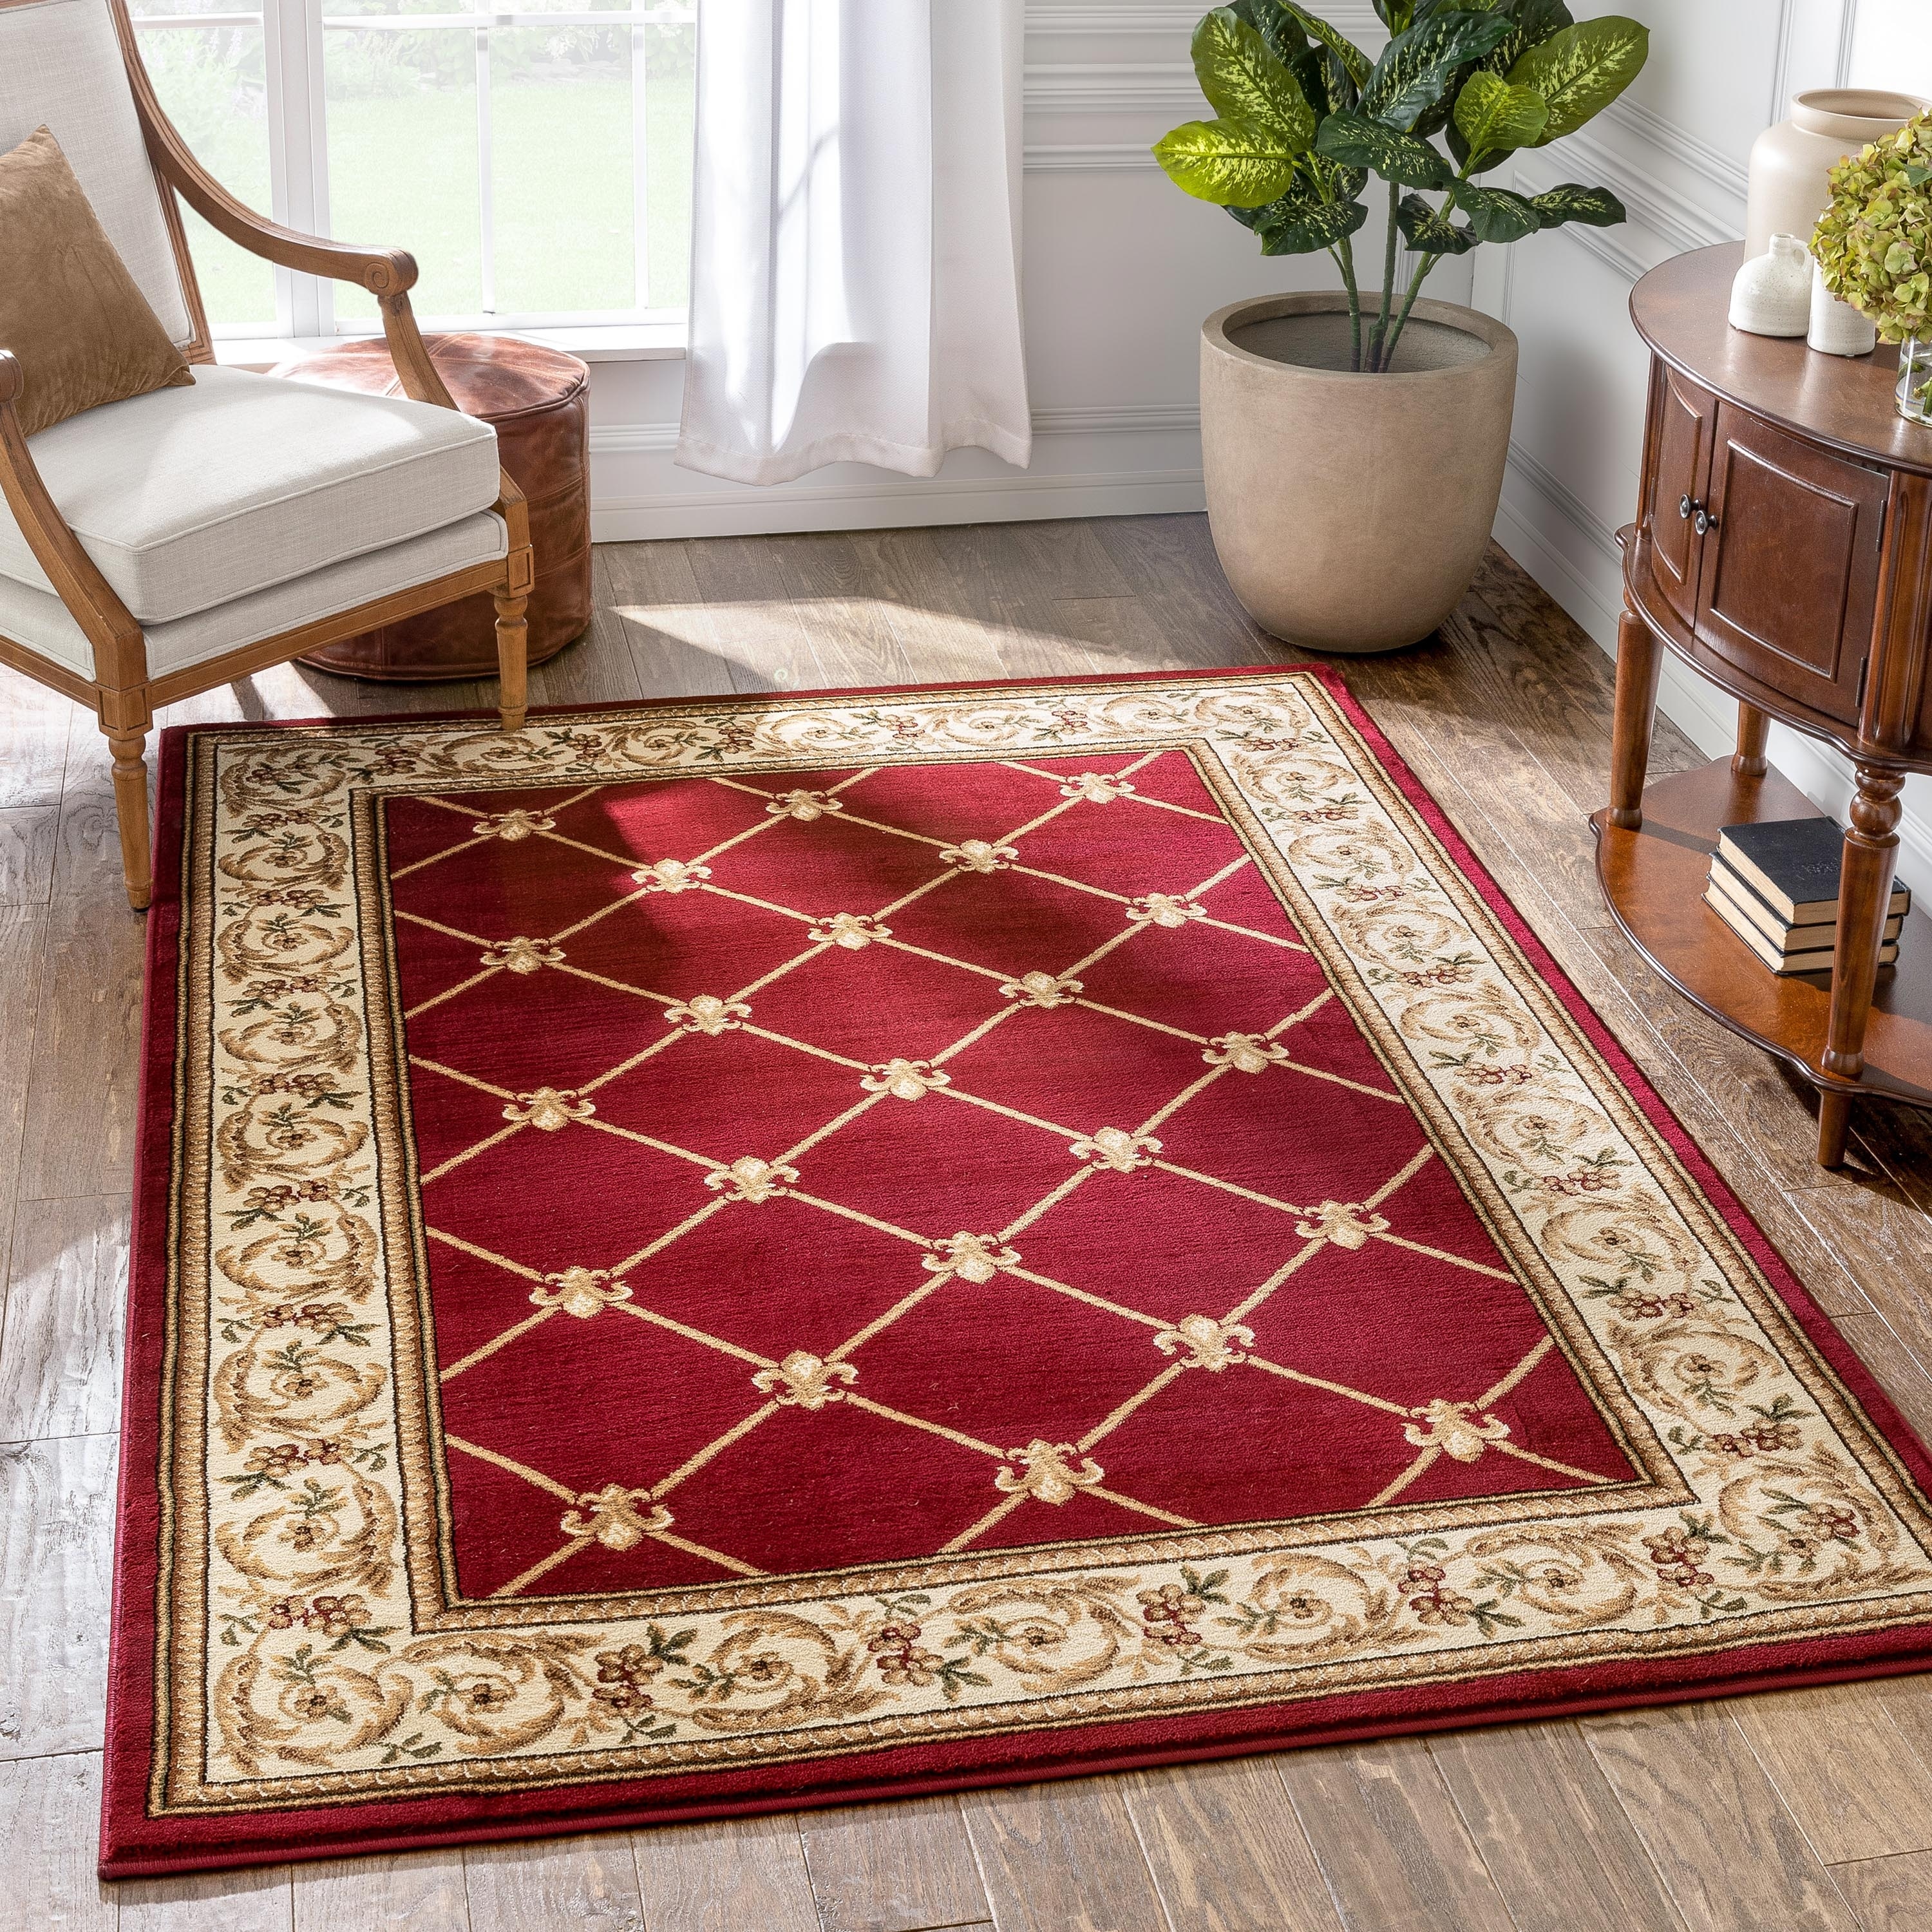 https://ak1.ostkcdn.com/images/products/is/images/direct/3938dd58650d43413bafd3aeb4b2bd9467ade8aa/Well-Woven-Timeless-Fleur-De-Lis-Oriental-Persian-Traditional-Area-Rug.jpg